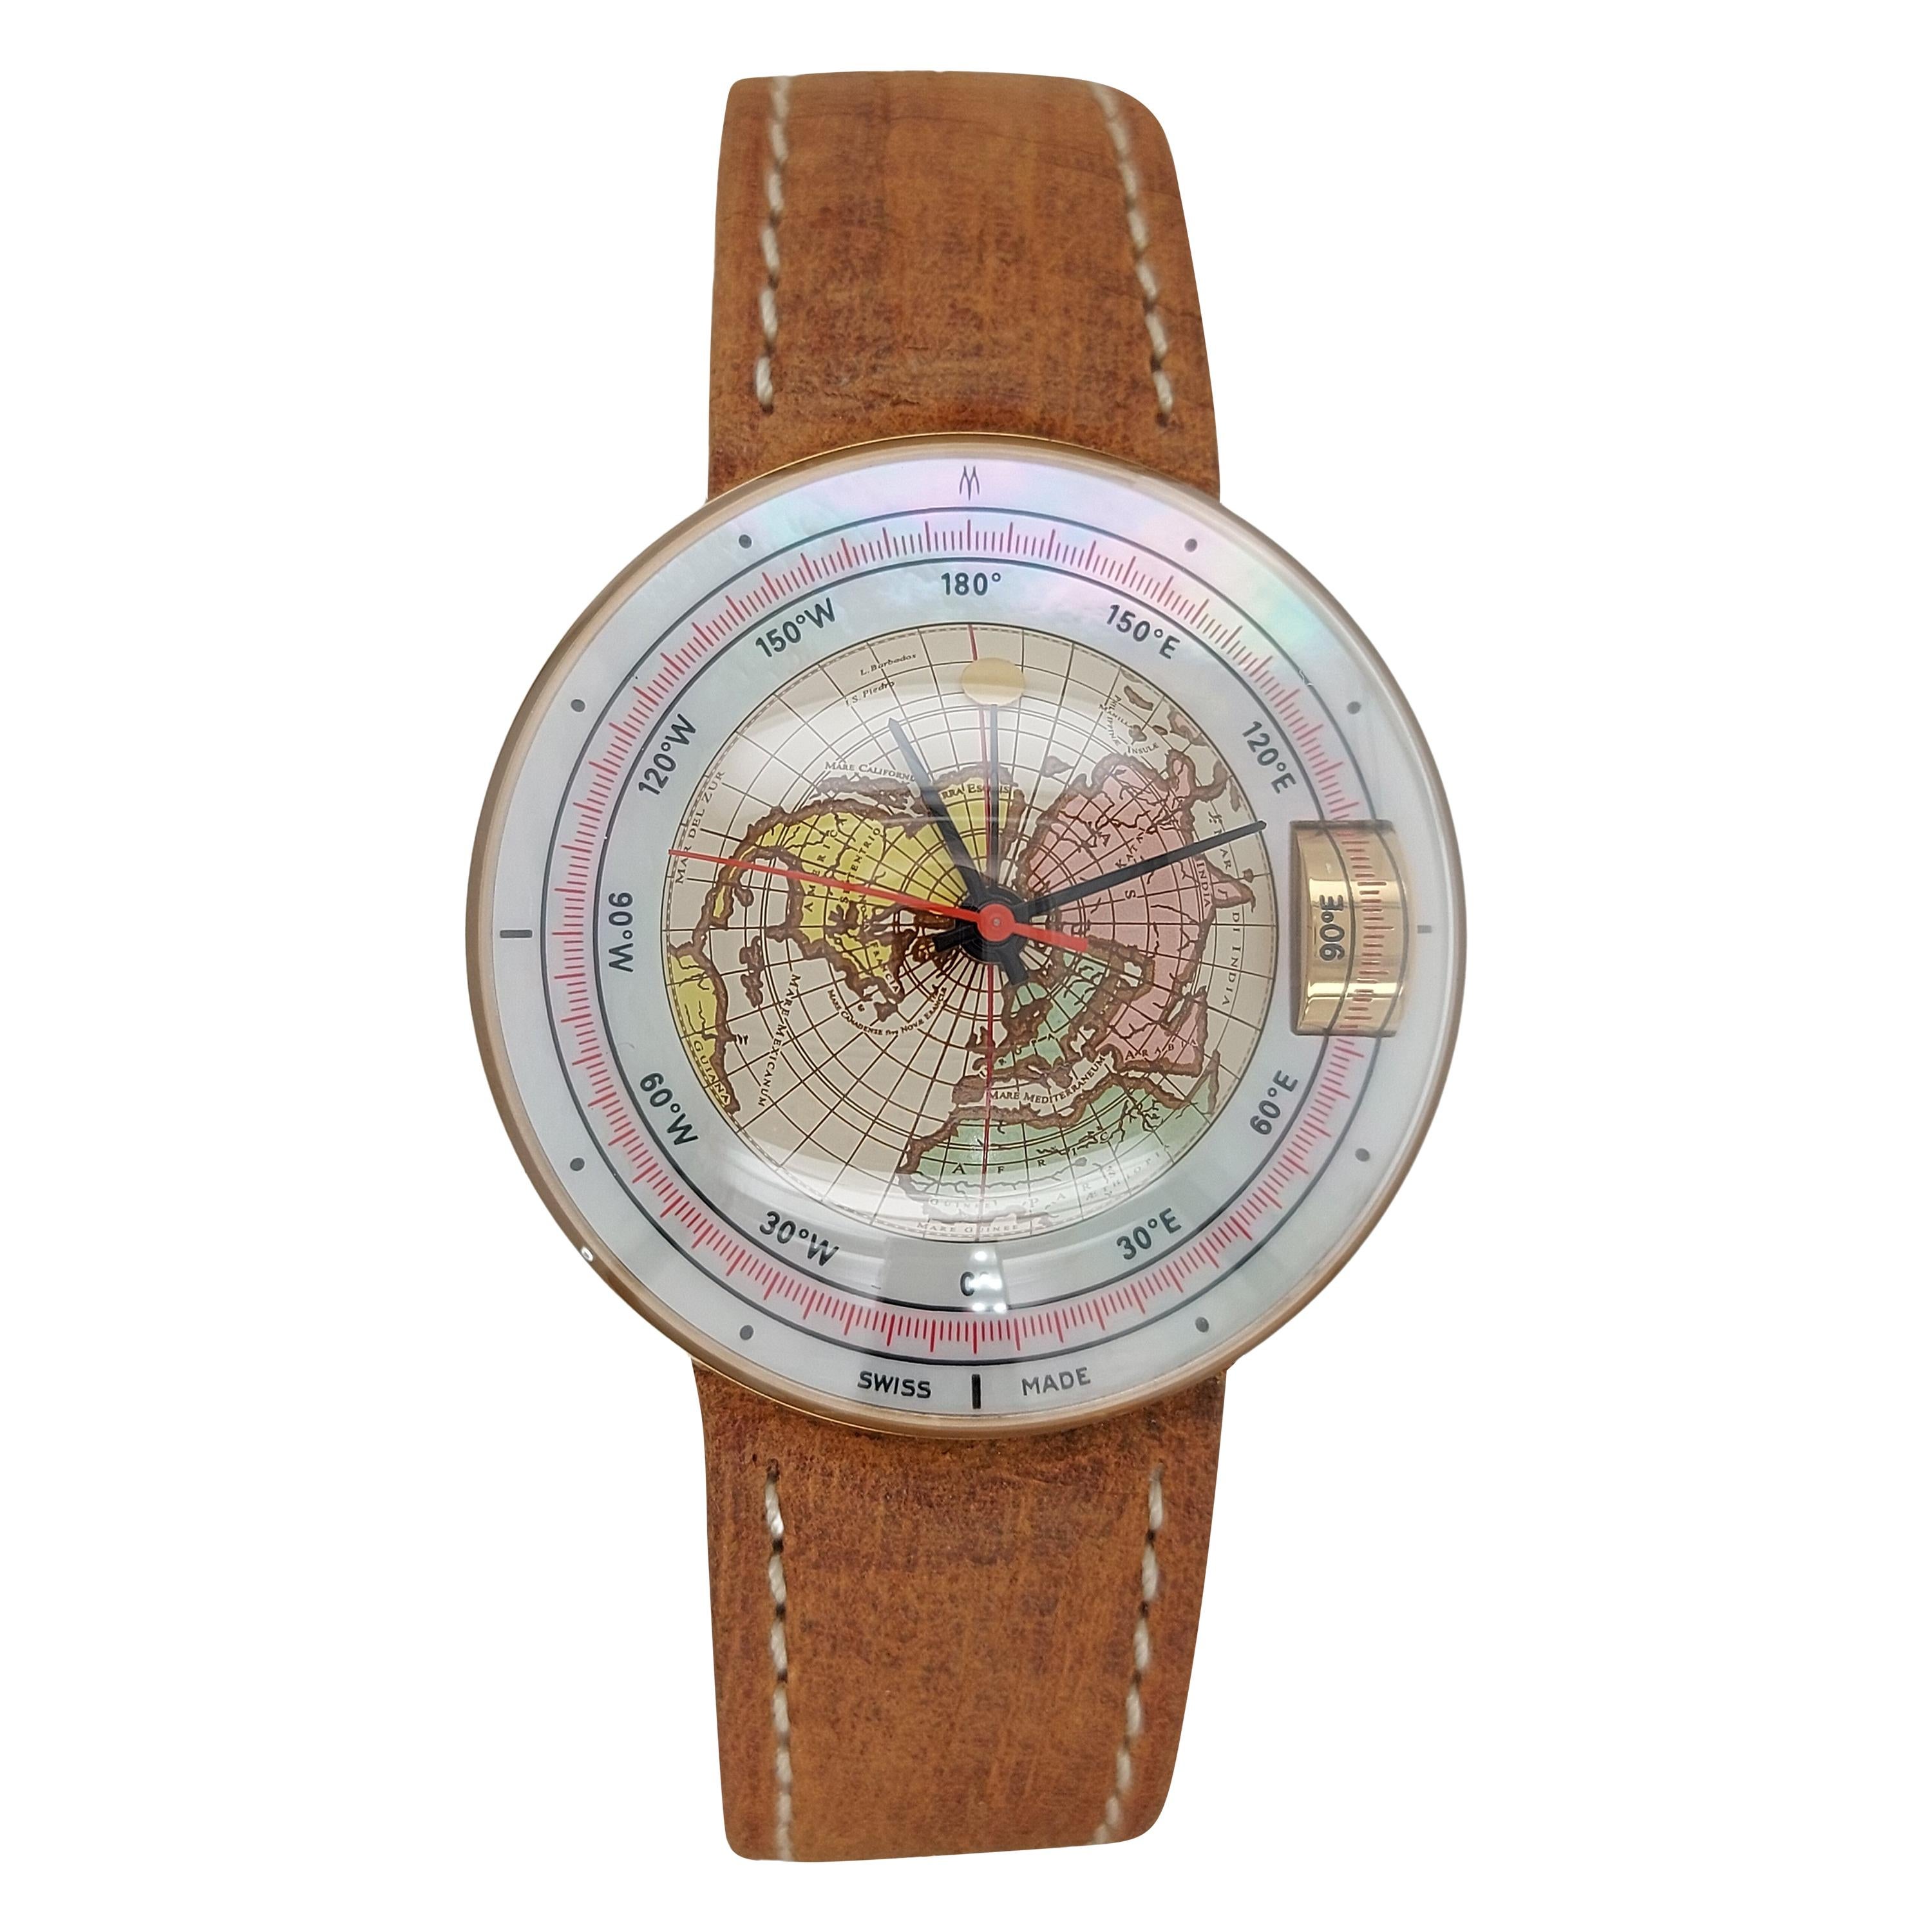 Magellan 1521 World Time Gold Watch Depicting Northern 3D Hemisphere, Automatic For Sale